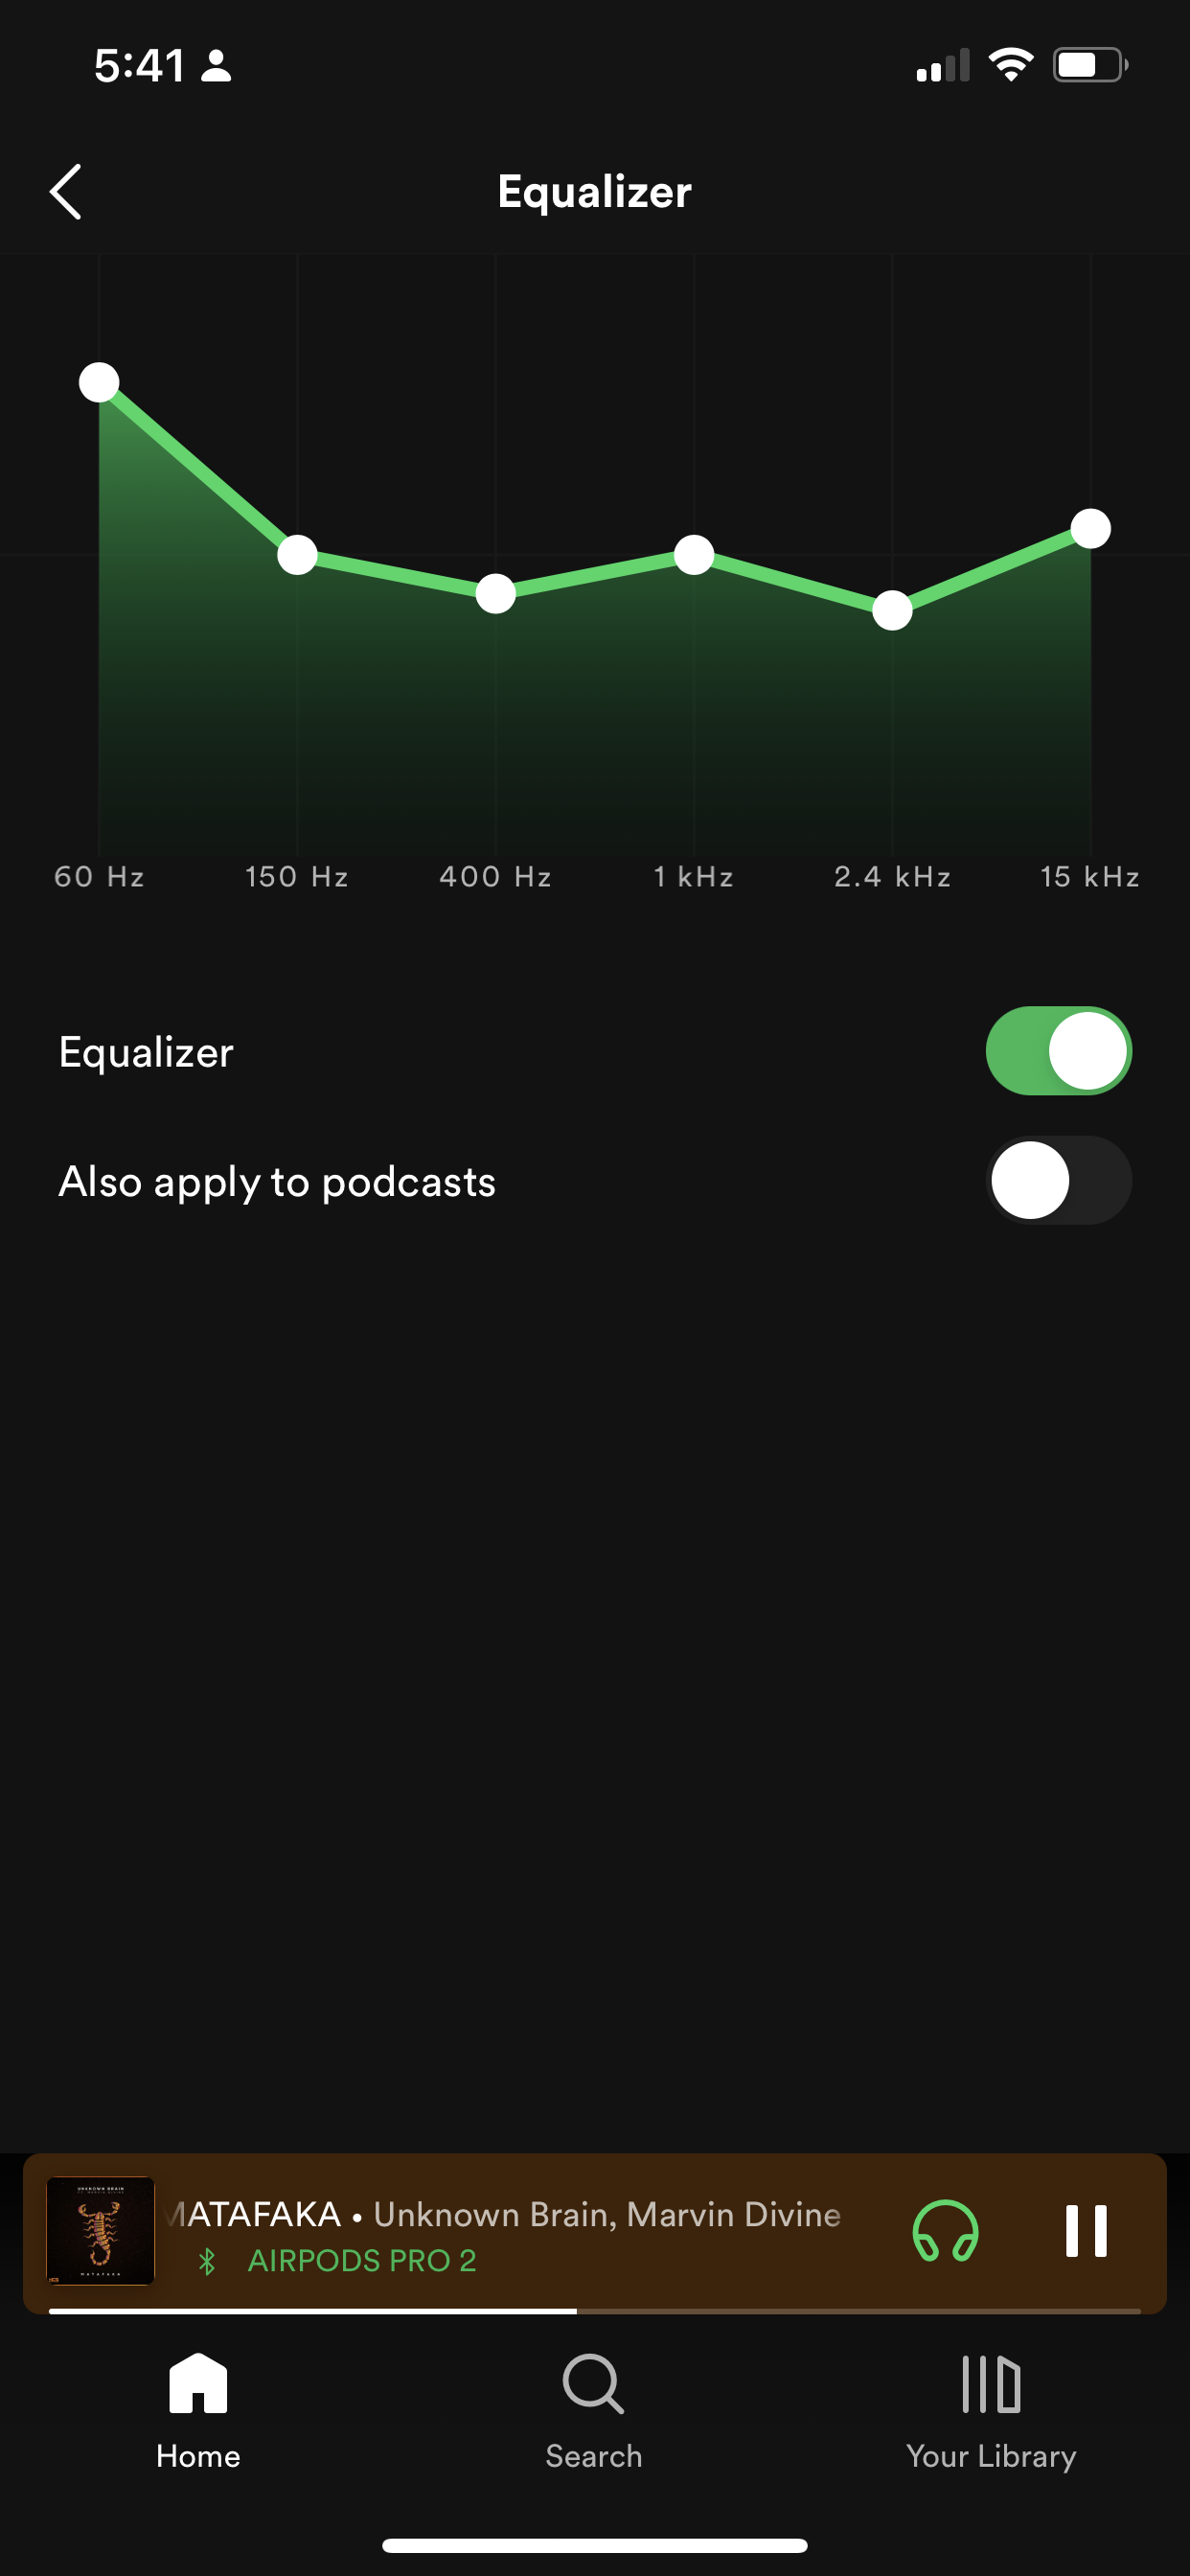 iOS] Equalizer presets missing - The Spotify Community